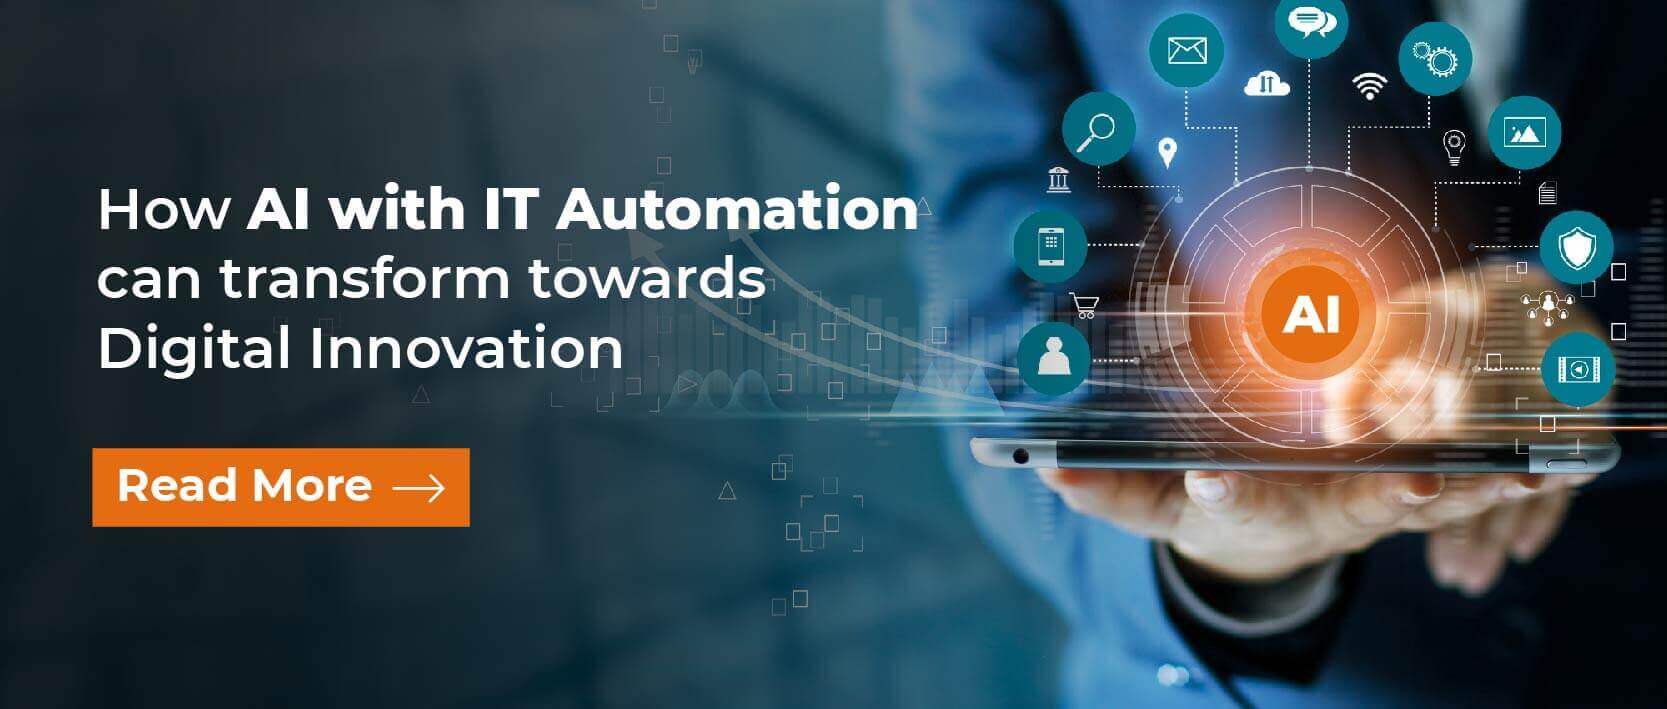 Artificial intelligence for IT process automation and IT transformation